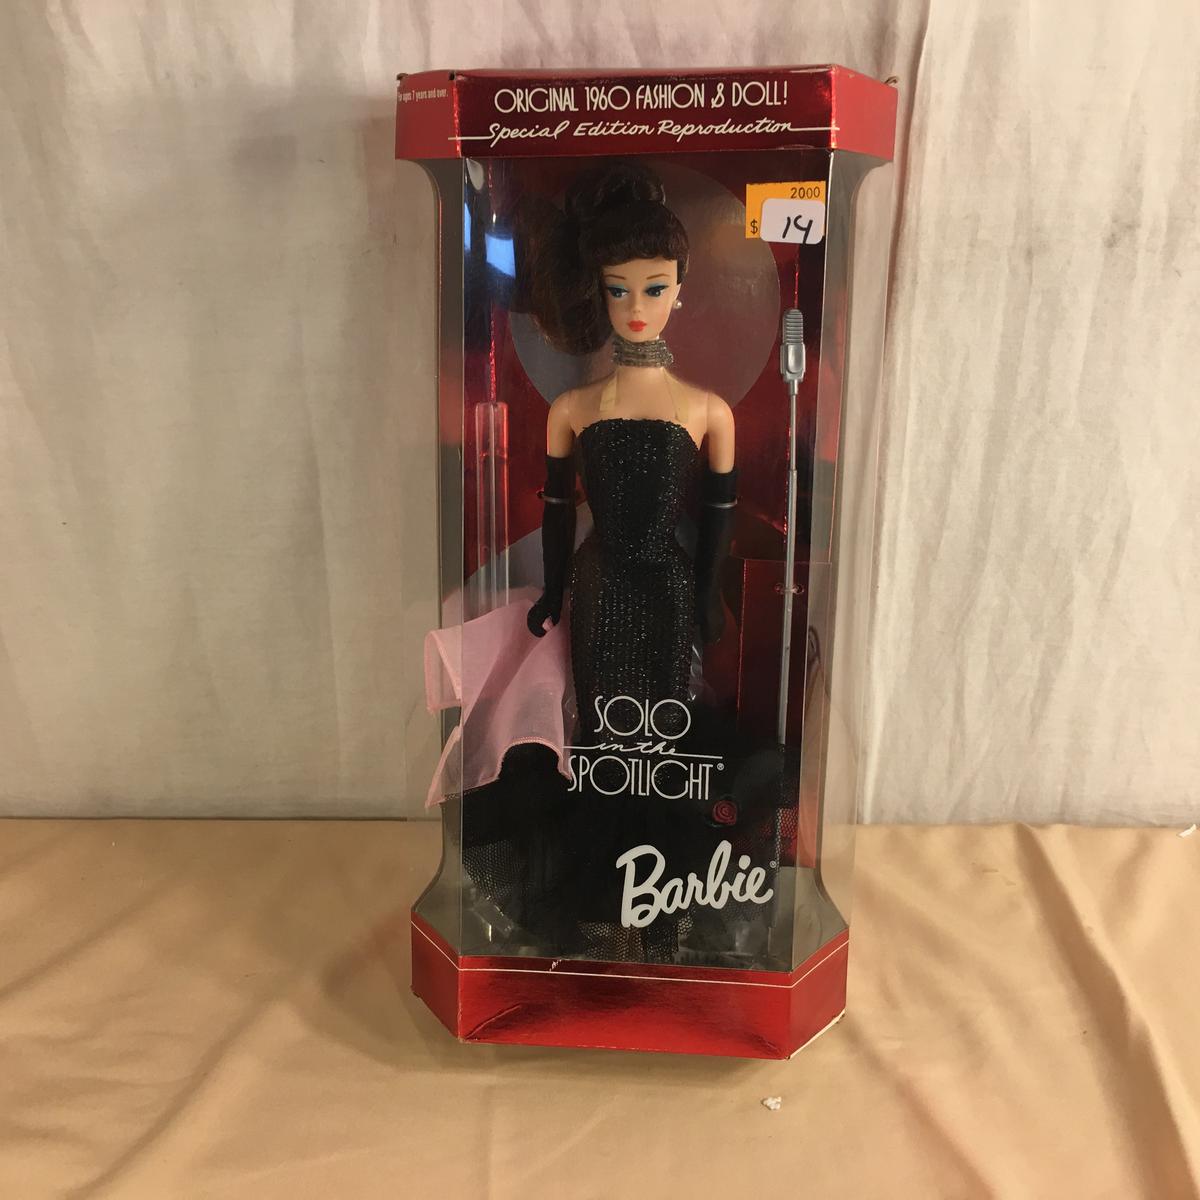 Collector Solo in the Spotlight Barbie Doll 13" Tall